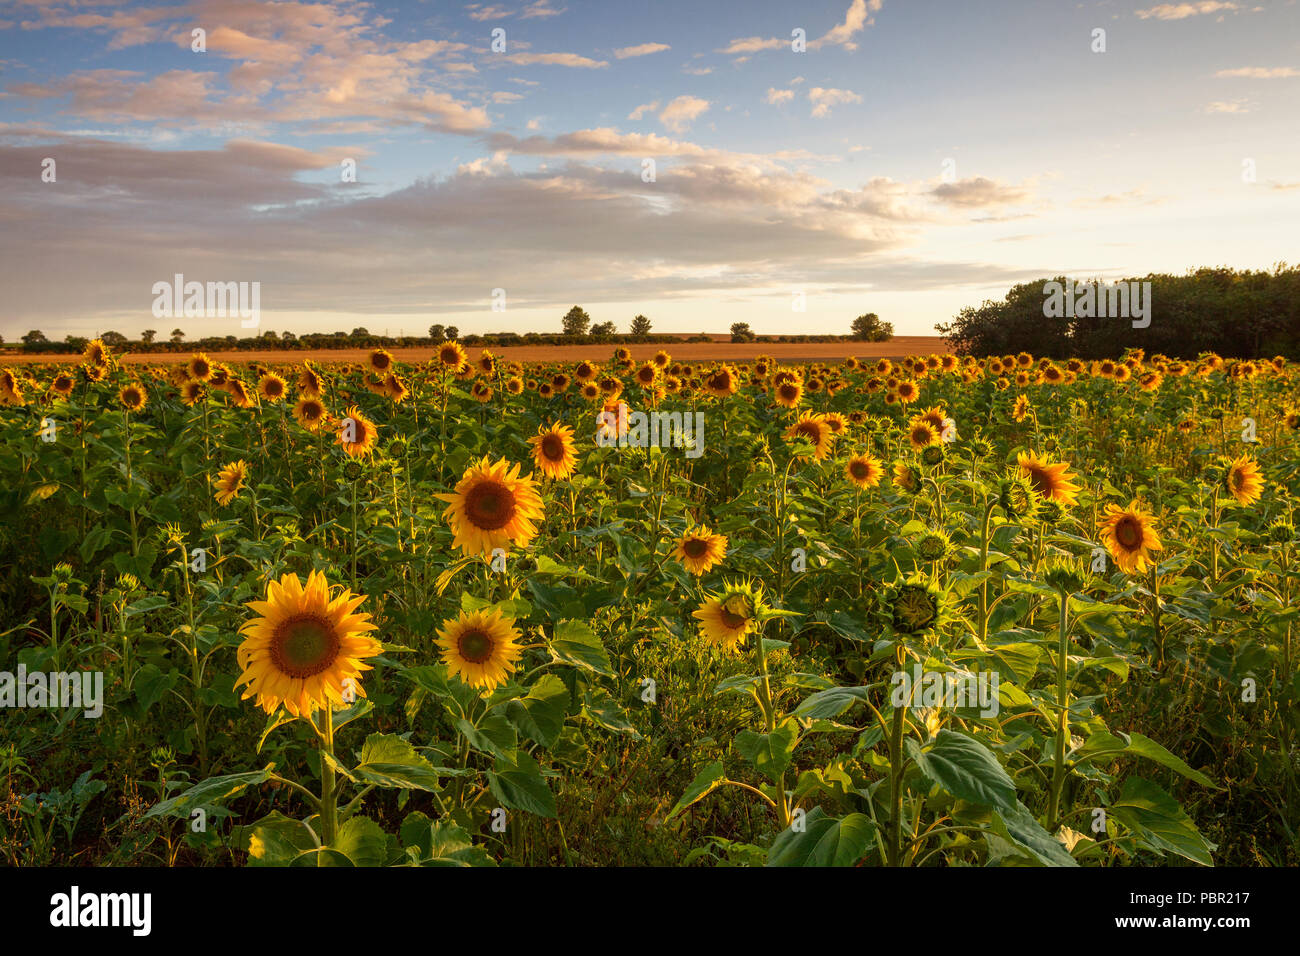 Goxhill, North Lincolnshire, UK. 29th July 2018. UK Weather: After a wet and windy day, the clouds eventually clear over a field of sunflowers, bathing the field in late evening light. Goxhill, North Lincolnshire, UK. 29th July 2018. Credit: LEE BEEL/Alamy Live News Stock Photo